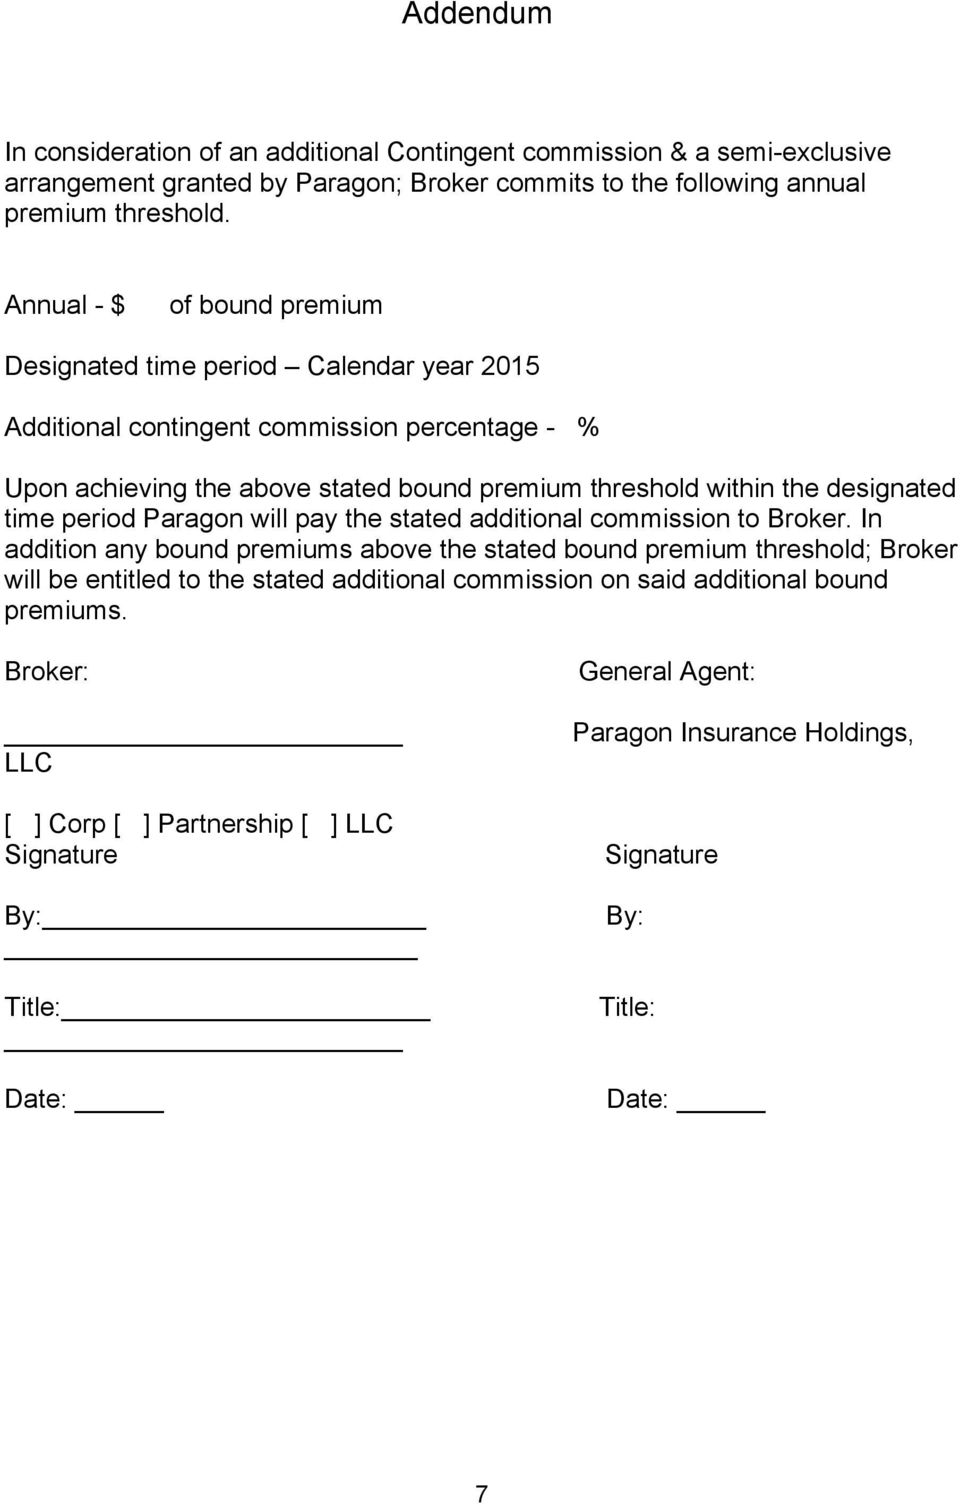 the designated time period Paragon will pay the stated additional commission to Broker.